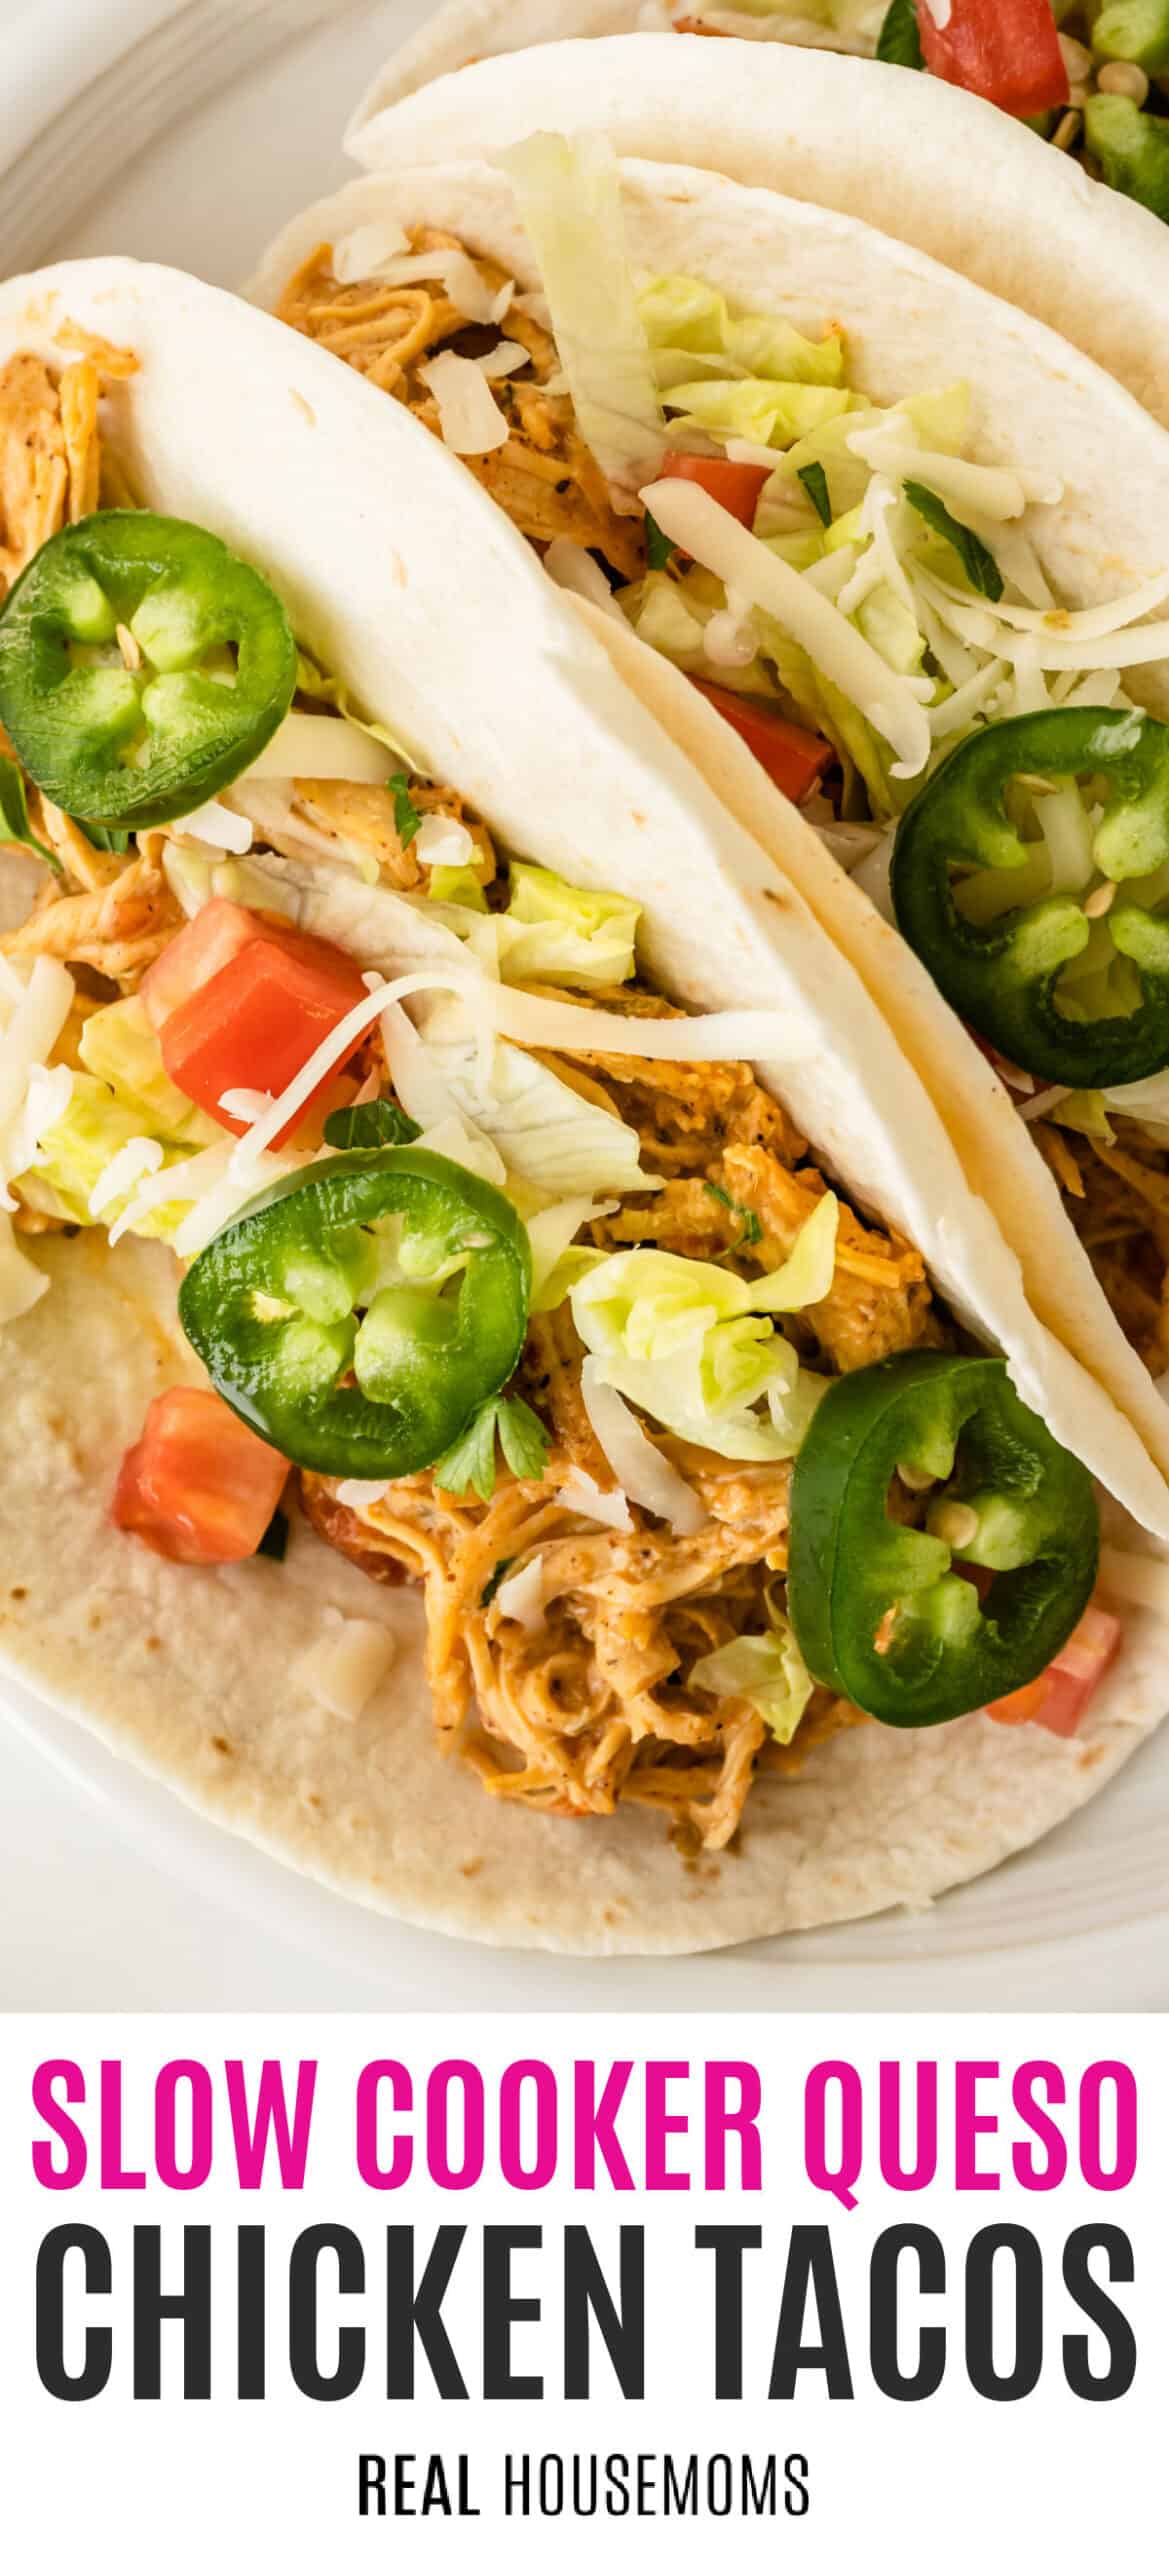 Slow Cooker Queso Chicken Tacos ⋆ Real Housemoms